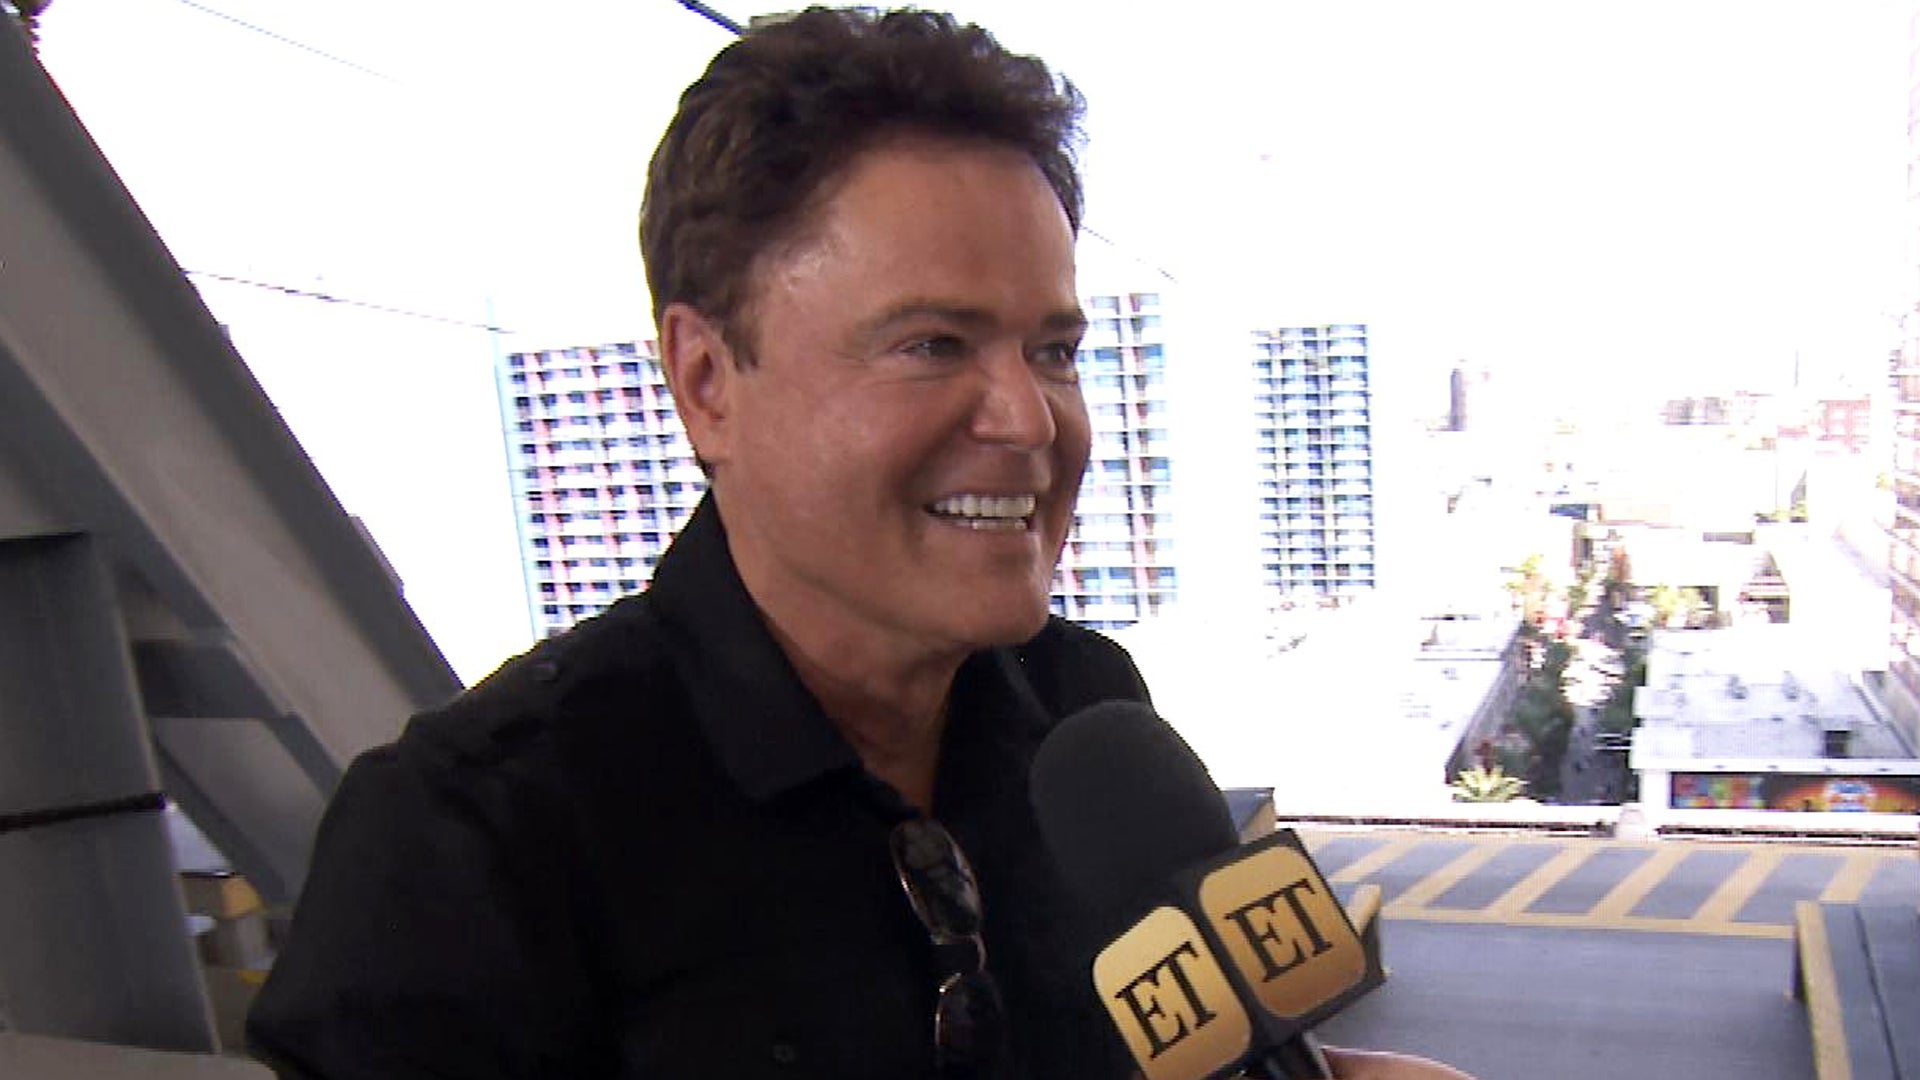 Donny Osmond Celebrates First Week of Solo Vegas Residency With Ziplining!  (Exclusive)